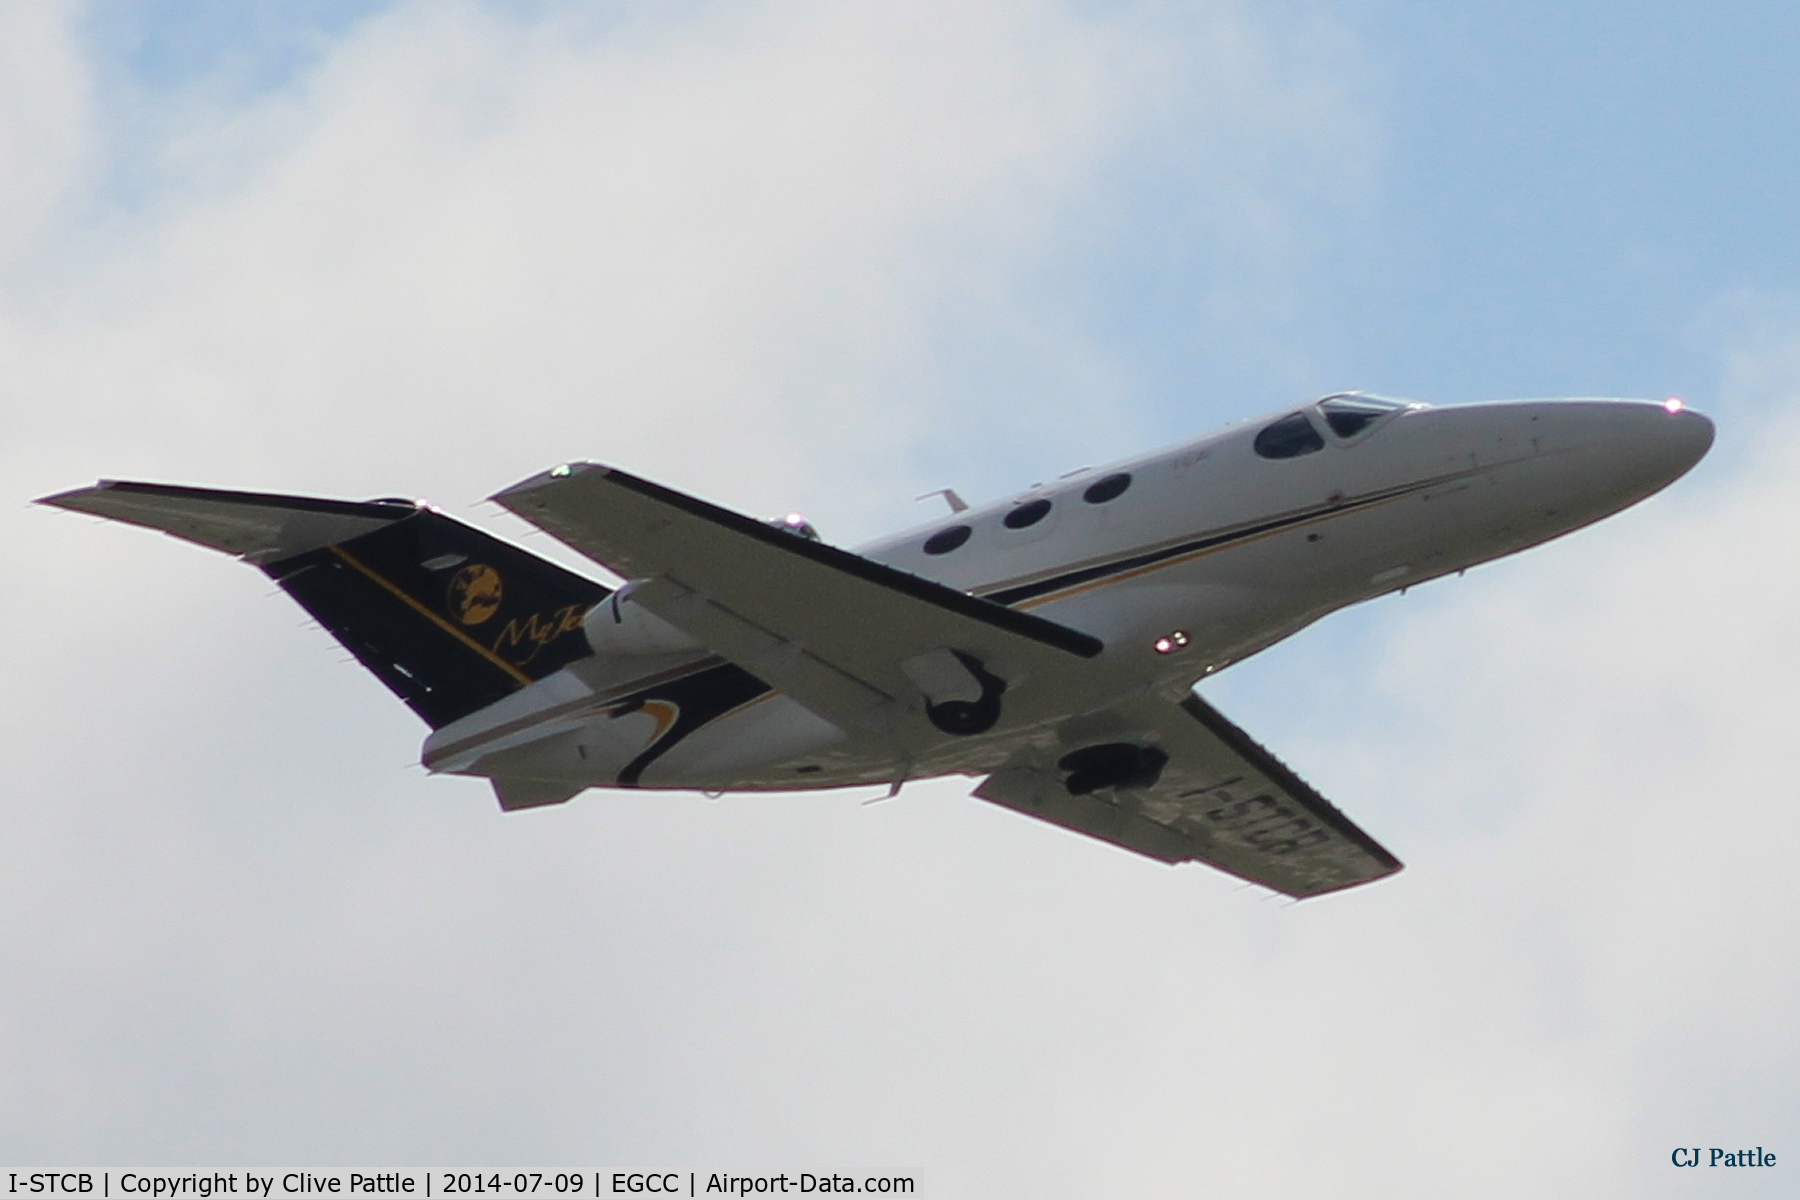 I-STCB, 2010 Cessna 510 Citation Mustang Citation Mustang C/N 510-0330, Take Off climb from Manchester